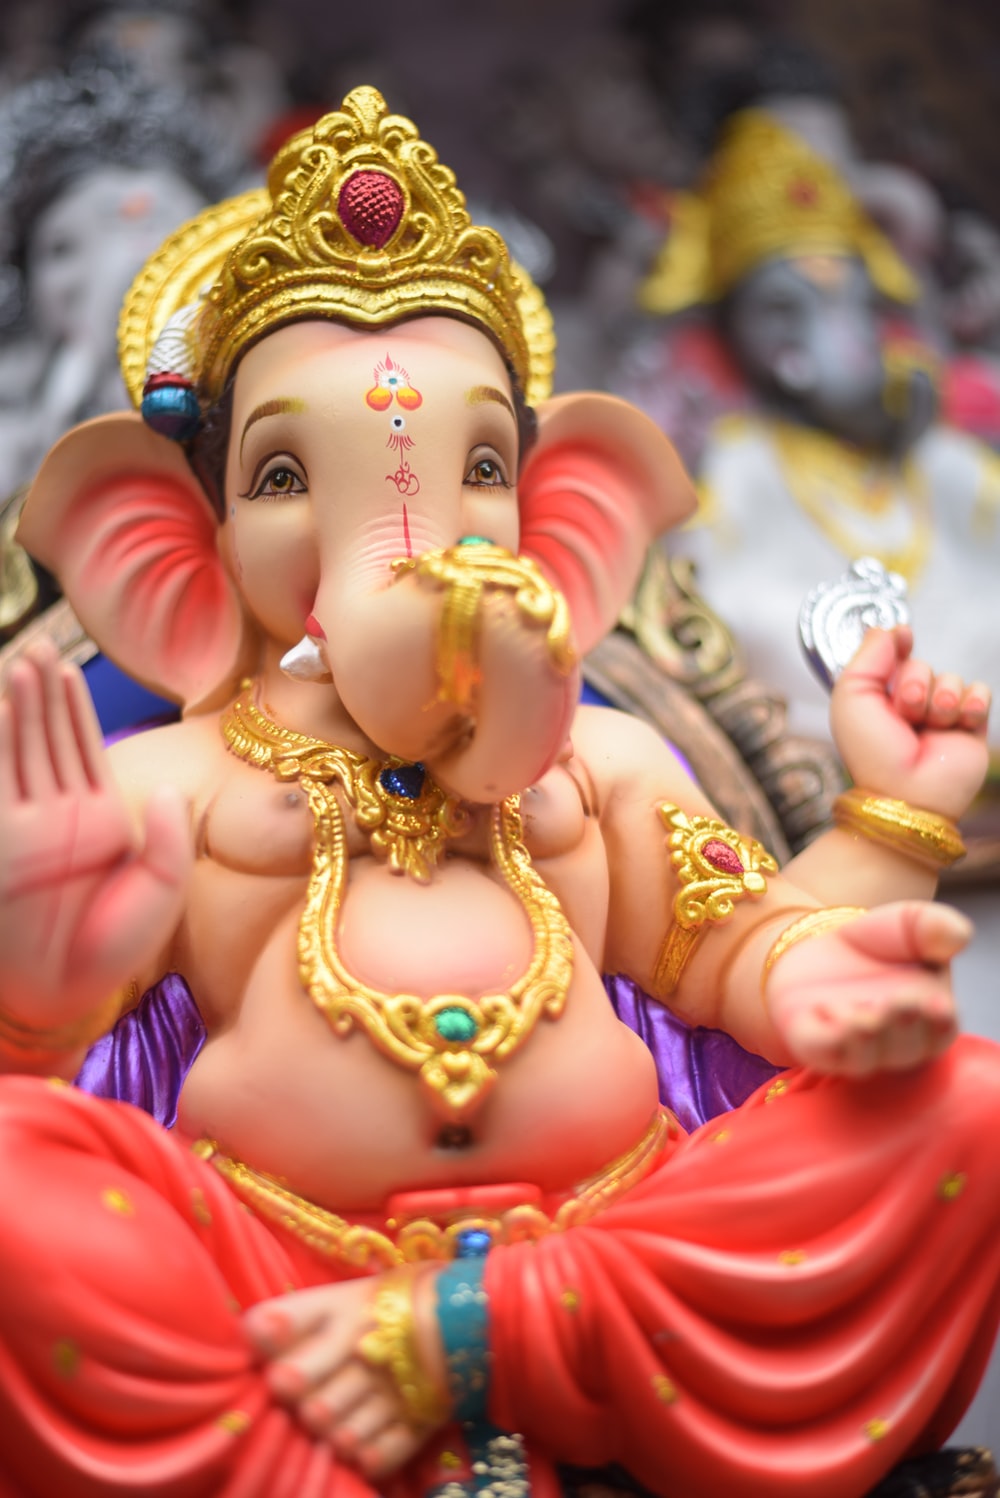 Ganesha Picture. Download Free Image